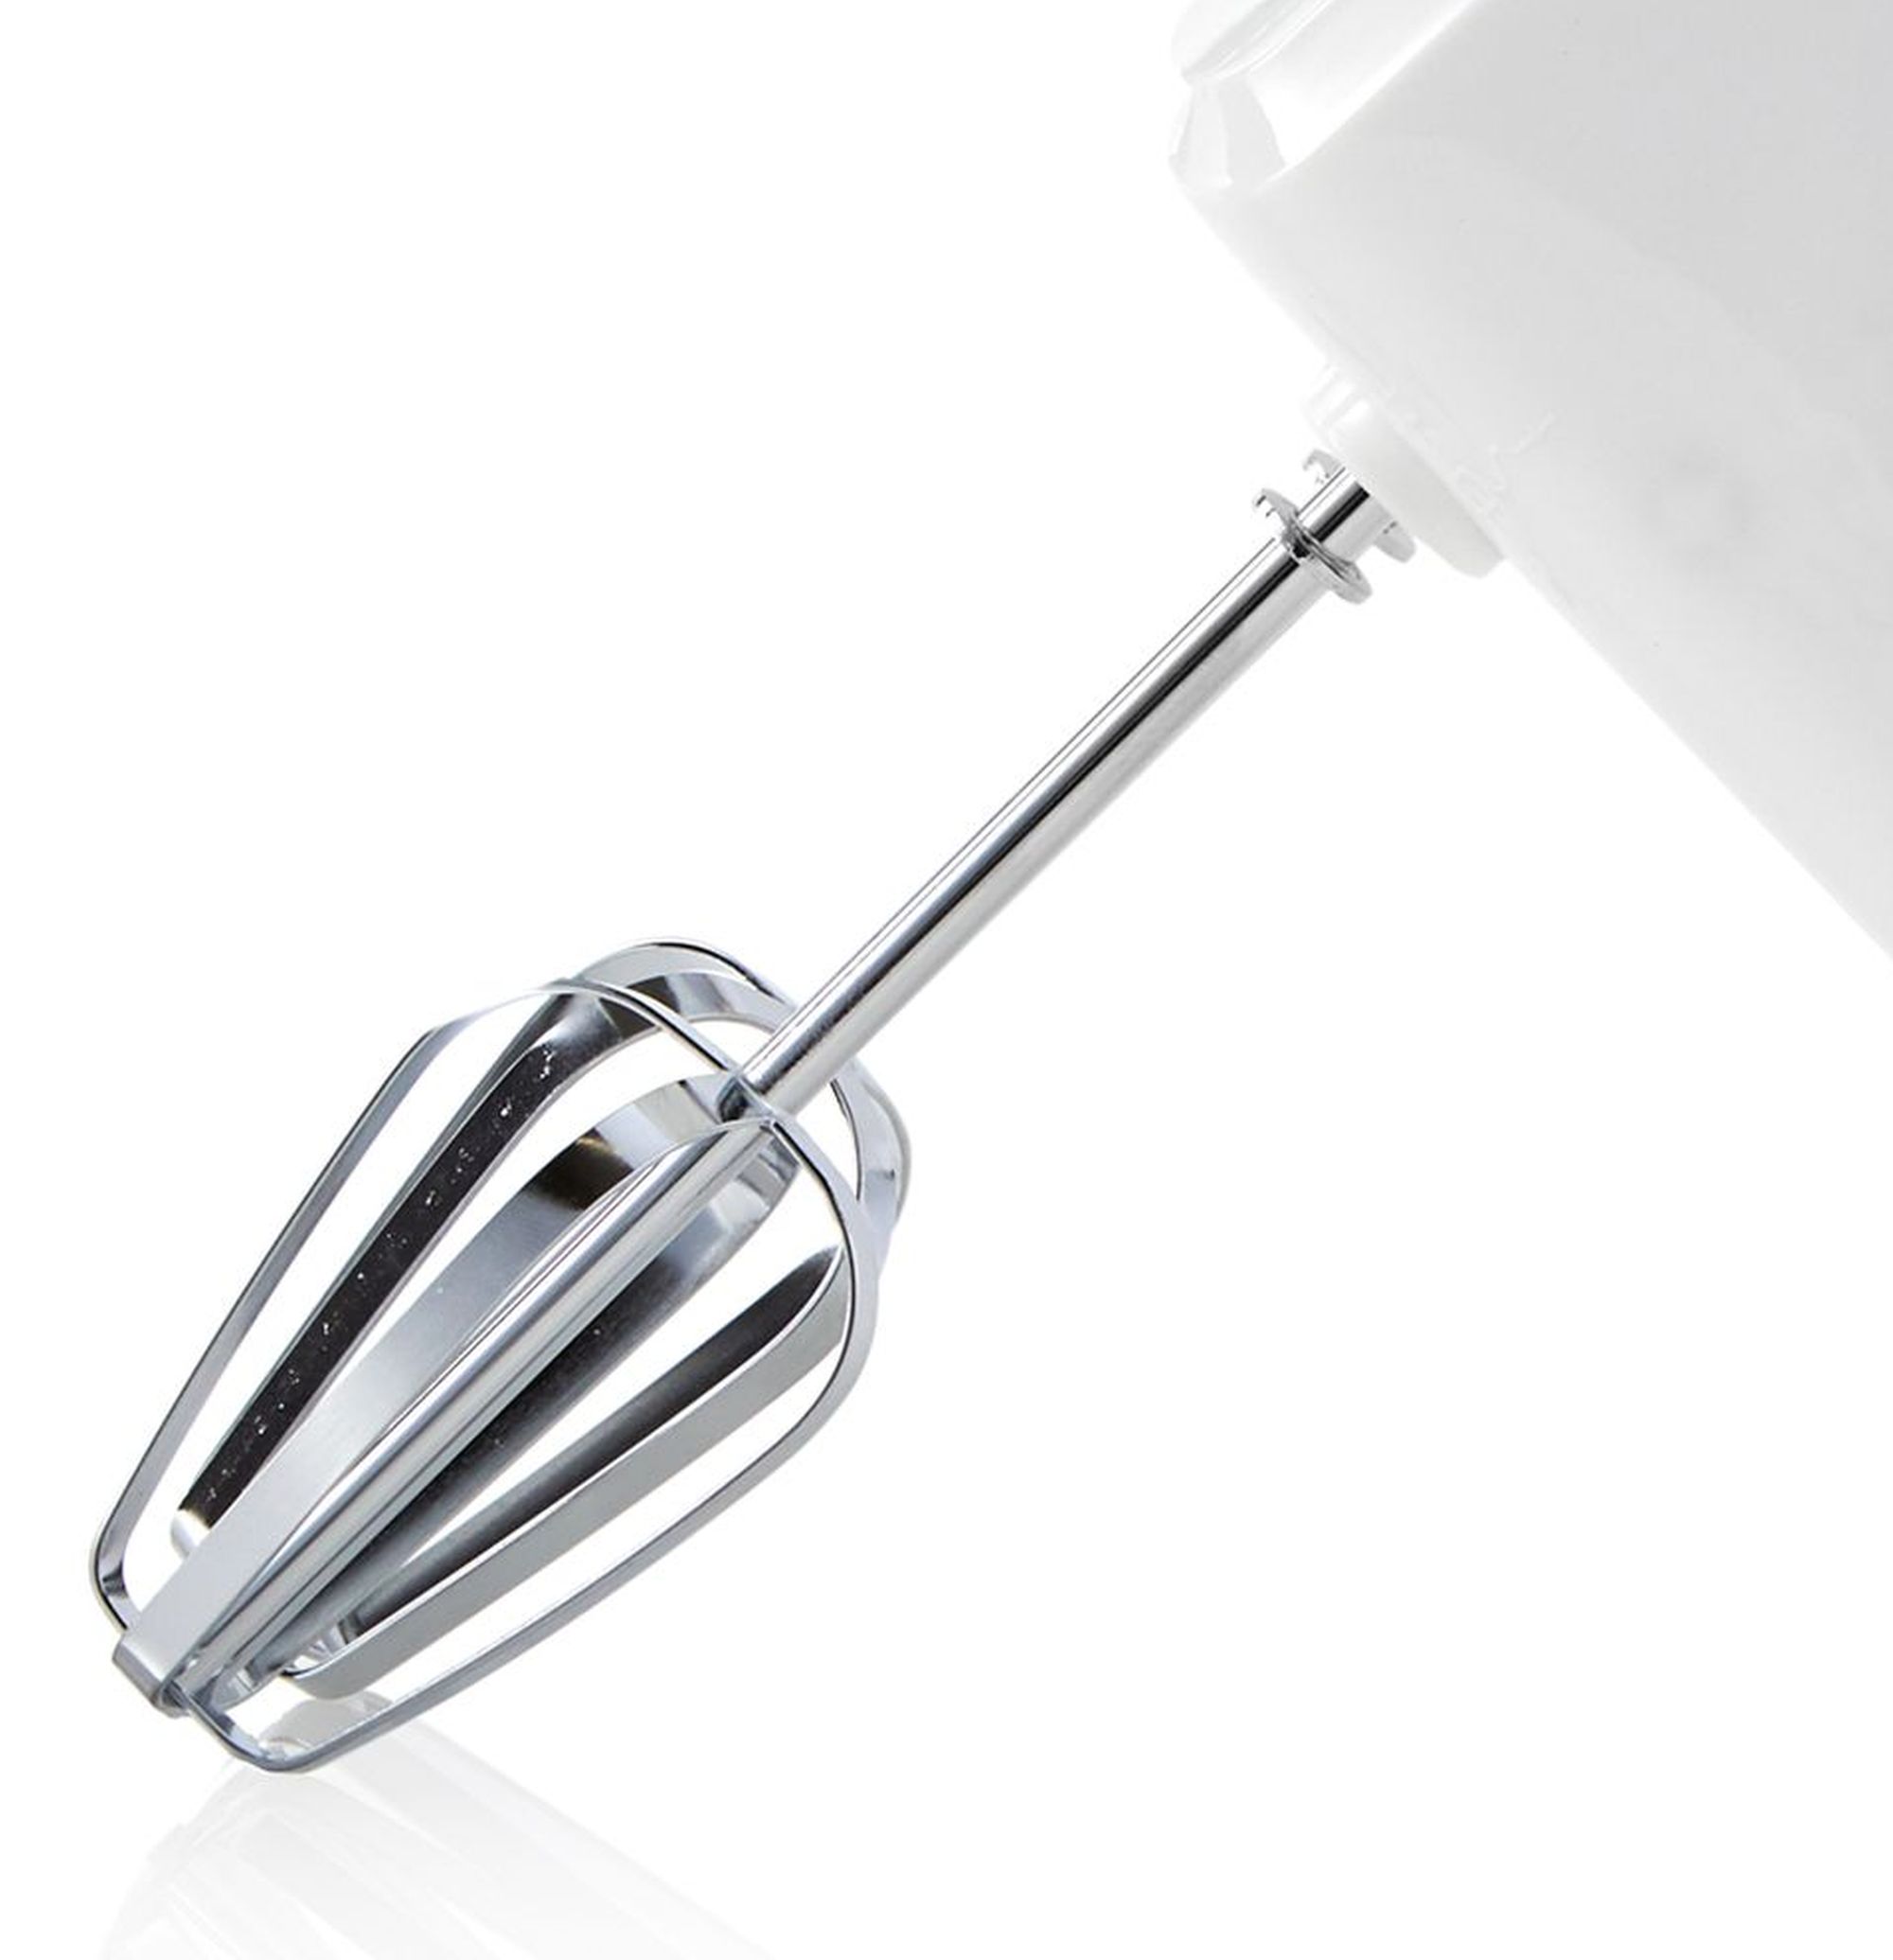 Continental Electric New 5 Speed Hand Mixer White - image 3 of 4